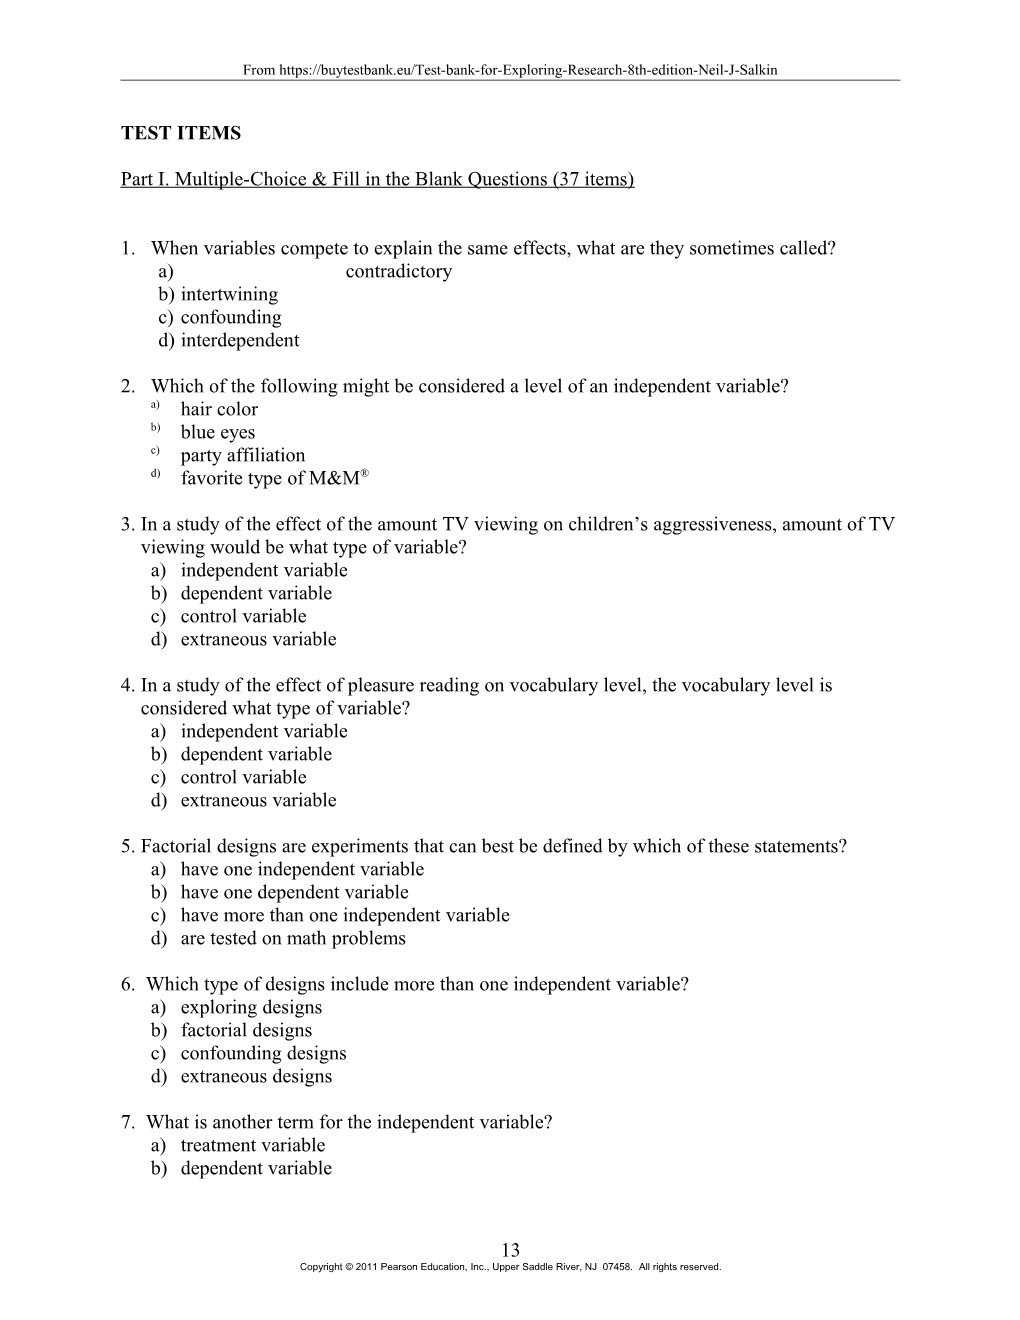 Part I. Multiple-Choice & Fill in the Blank Questions (37 Items)